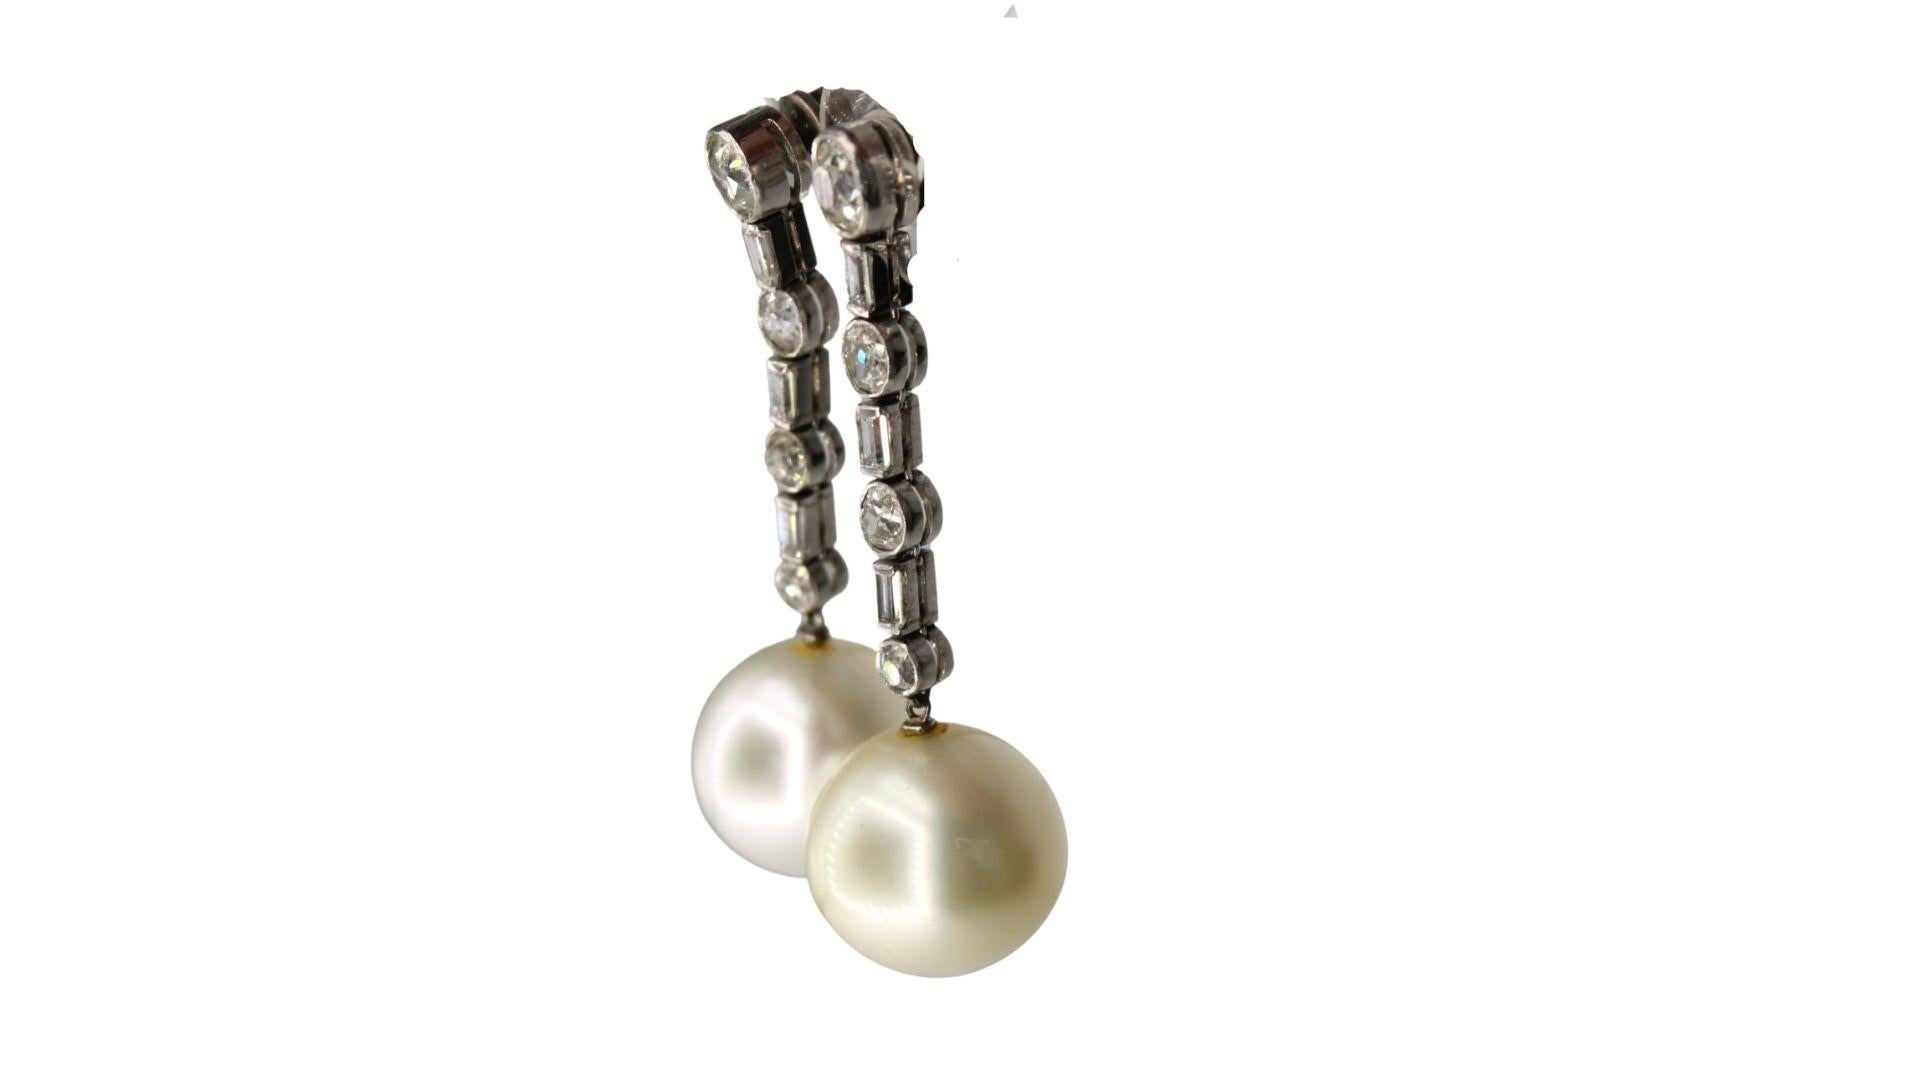 These Beautiful Estate Cultivate Natural South Sea Pearls Diamond Earrings Feature:
South Sea Pearl Shape :  Round
Total earring weight: 5.55 g
earring length: 4cm
Average Color/Surface : Light Golden-Cream/ Some Natural Flaws(see photos)
Pearl